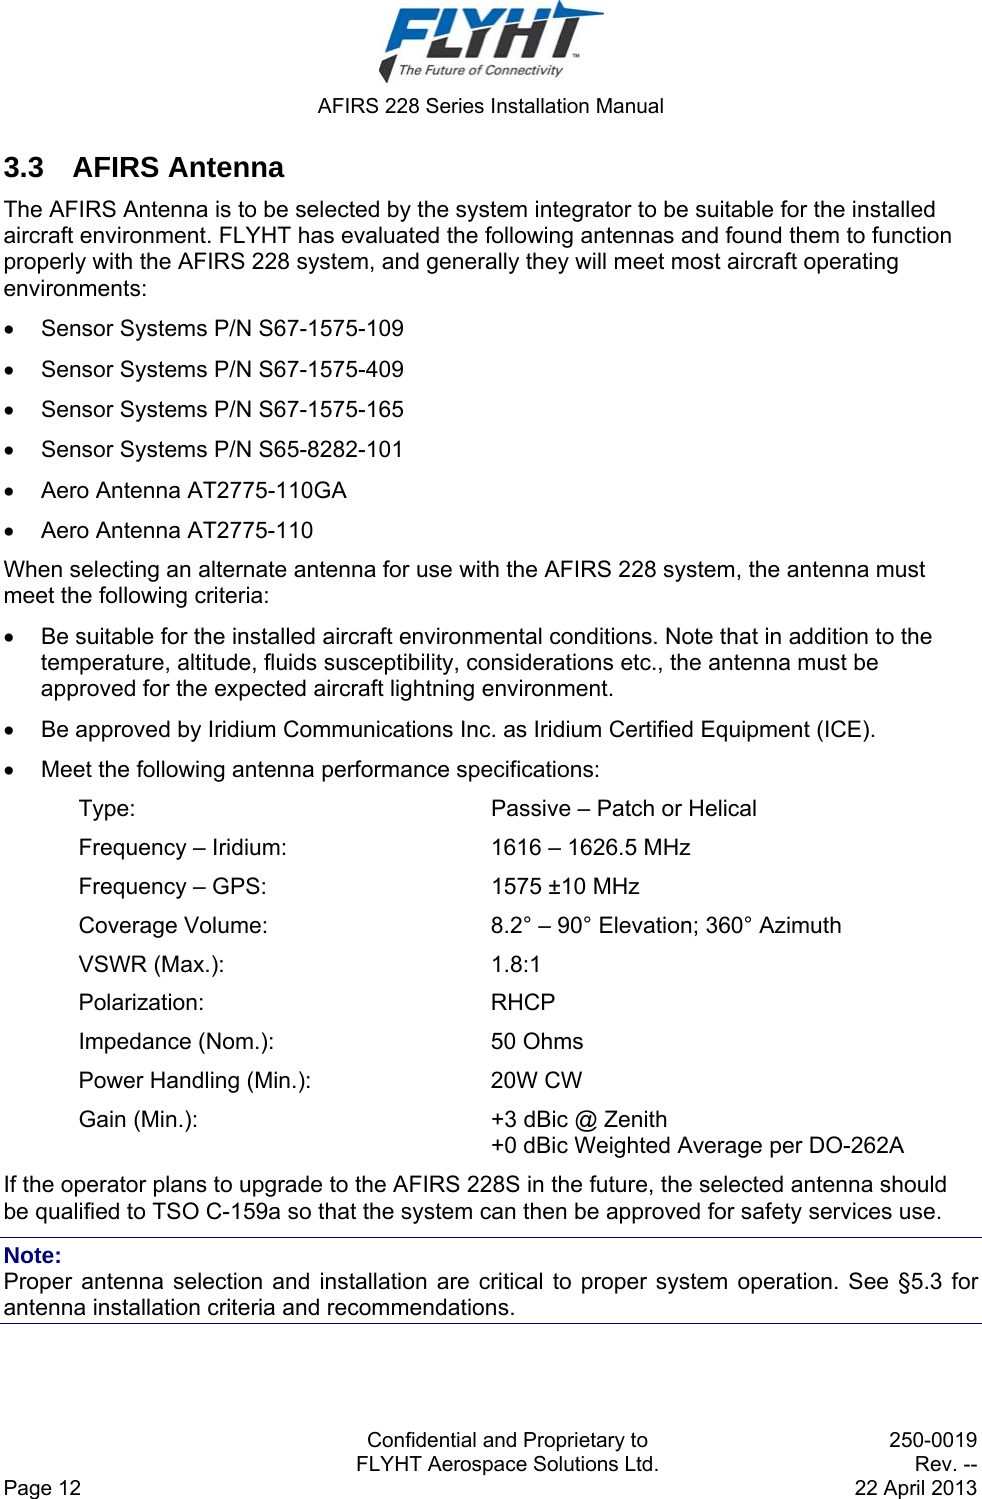  AFIRS 228 Series Installation Manual   Confidential and Proprietary to  250-0019   FLYHT Aerospace Solutions Ltd.  Rev. -- Page 12    22 April 2013 3.3 AFIRS Antenna The AFIRS Antenna is to be selected by the system integrator to be suitable for the installed aircraft environment. FLYHT has evaluated the following antennas and found them to function properly with the AFIRS 228 system, and generally they will meet most aircraft operating environments:   Sensor Systems P/N S67-1575-109   Sensor Systems P/N S67-1575-409   Sensor Systems P/N S67-1575-165   Sensor Systems P/N S65-8282-101    Aero Antenna AT2775-110GA   Aero Antenna AT2775-110 When selecting an alternate antenna for use with the AFIRS 228 system, the antenna must meet the following criteria:   Be suitable for the installed aircraft environmental conditions. Note that in addition to the temperature, altitude, fluids susceptibility, considerations etc., the antenna must be approved for the expected aircraft lightning environment.   Be approved by Iridium Communications Inc. as Iridium Certified Equipment (ICE).   Meet the following antenna performance specifications: Type:  Passive – Patch or Helical Frequency – Iridium:  1616 – 1626.5 MHz Frequency – GPS:  1575 ±10 MHz Coverage Volume:  8.2° – 90° Elevation; 360° Azimuth VSWR (Max.):  1.8:1 Polarization: RHCP Impedance (Nom.):  50 Ohms Power Handling (Min.):  20W CW Gain (Min.):  +3 dBic @ Zenith +0 dBic Weighted Average per DO-262A If the operator plans to upgrade to the AFIRS 228S in the future, the selected antenna should be qualified to TSO C-159a so that the system can then be approved for safety services use. Note: Proper antenna selection and installation are critical to proper system operation. See §5.3 for antenna installation criteria and recommendations. 